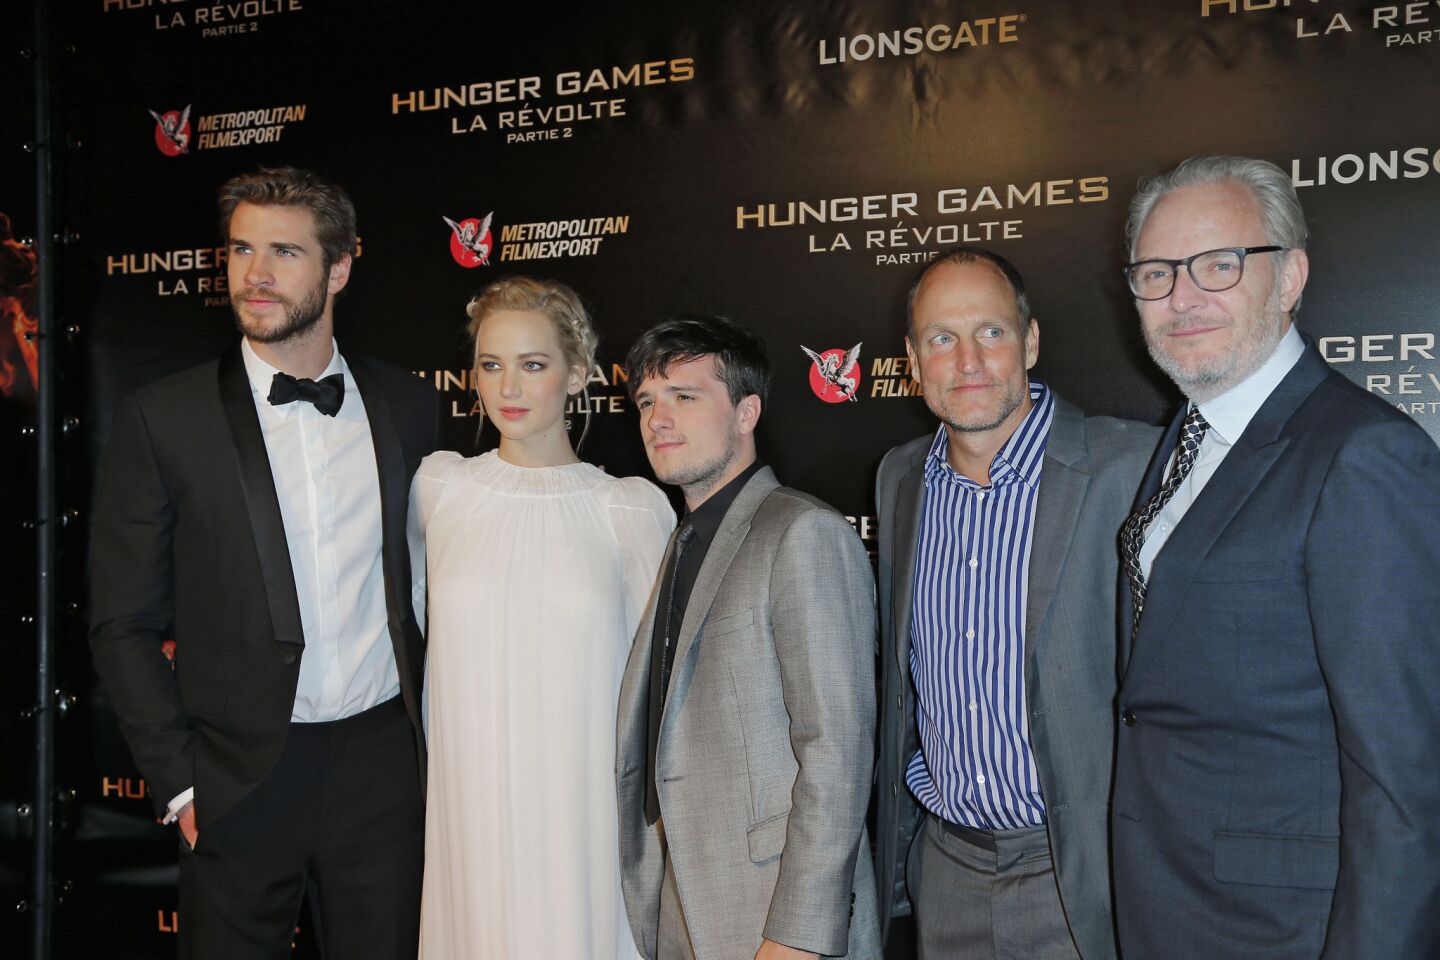 'The Hunger Games: Mockingjay - Part 2' in Paris